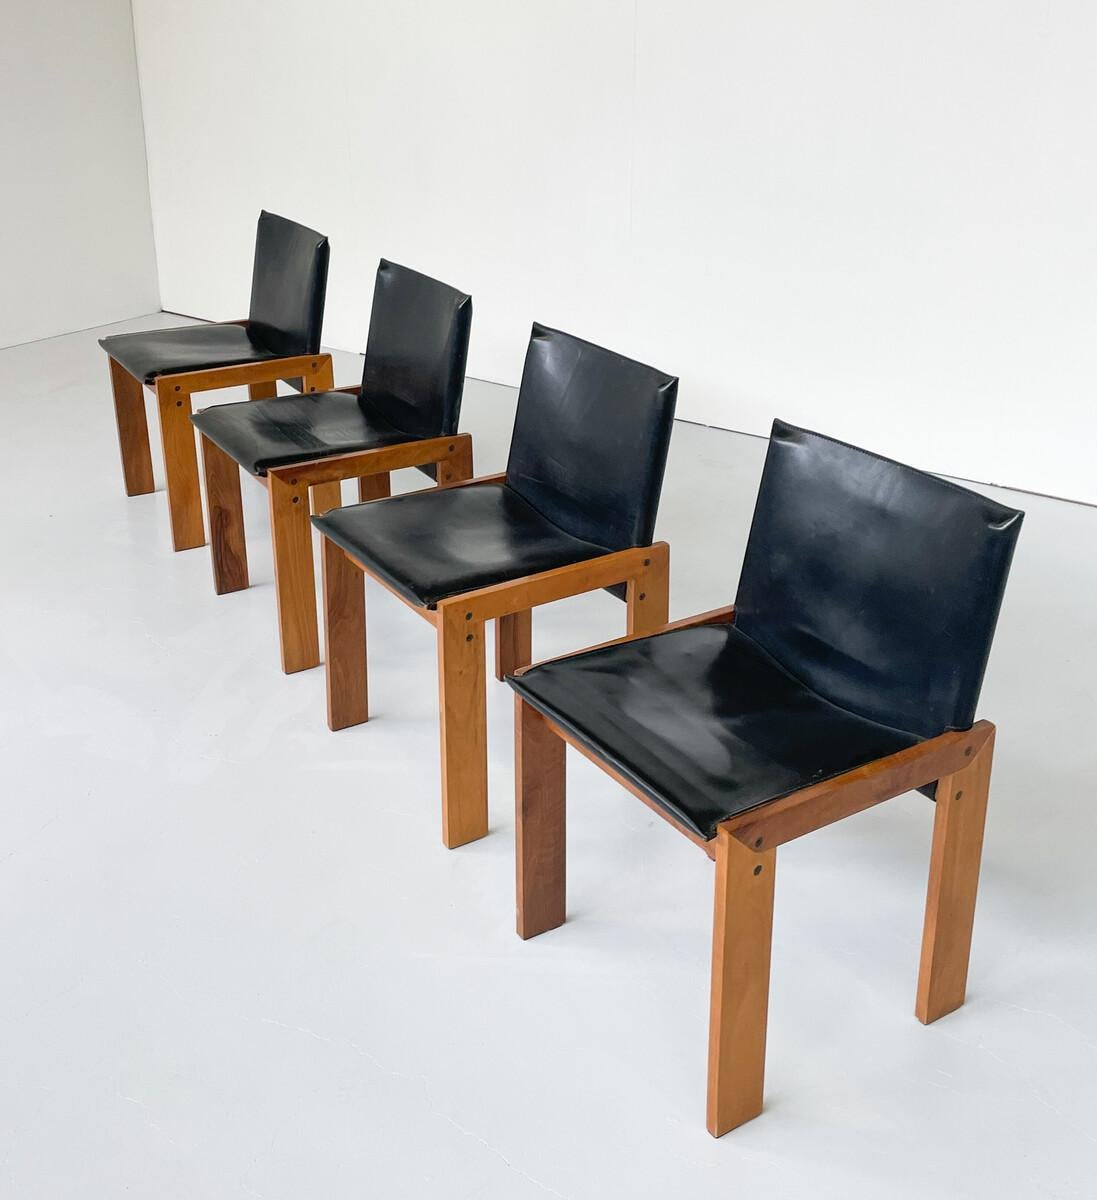 Italian Mid-Century Modern Set of 4 Chairs in the Style of Scarpa, Wood and Leather  For Sale